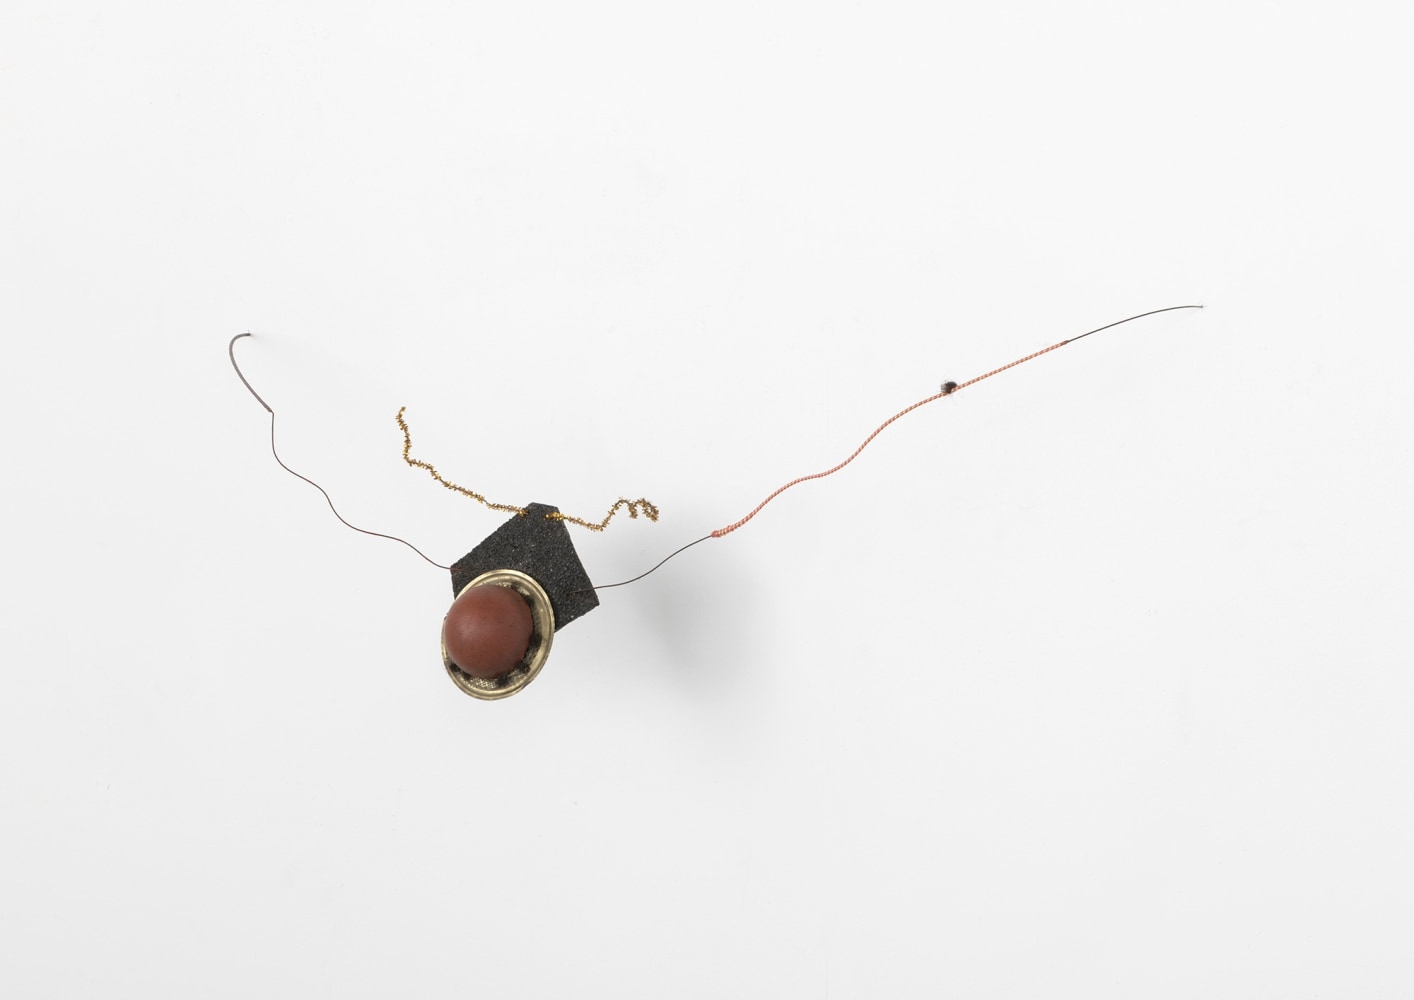 David Hammons
Untitled, 1976&amp;mdash;77
Wire, rope, pipe cleaner, hair, rubber, mesh,
aluminum, sand paper and thumb tack
10 &amp;times; 28 1/2 &amp;times; 6 inches
25.4 &amp;times; 72.4 &amp;times; 15.2 cm